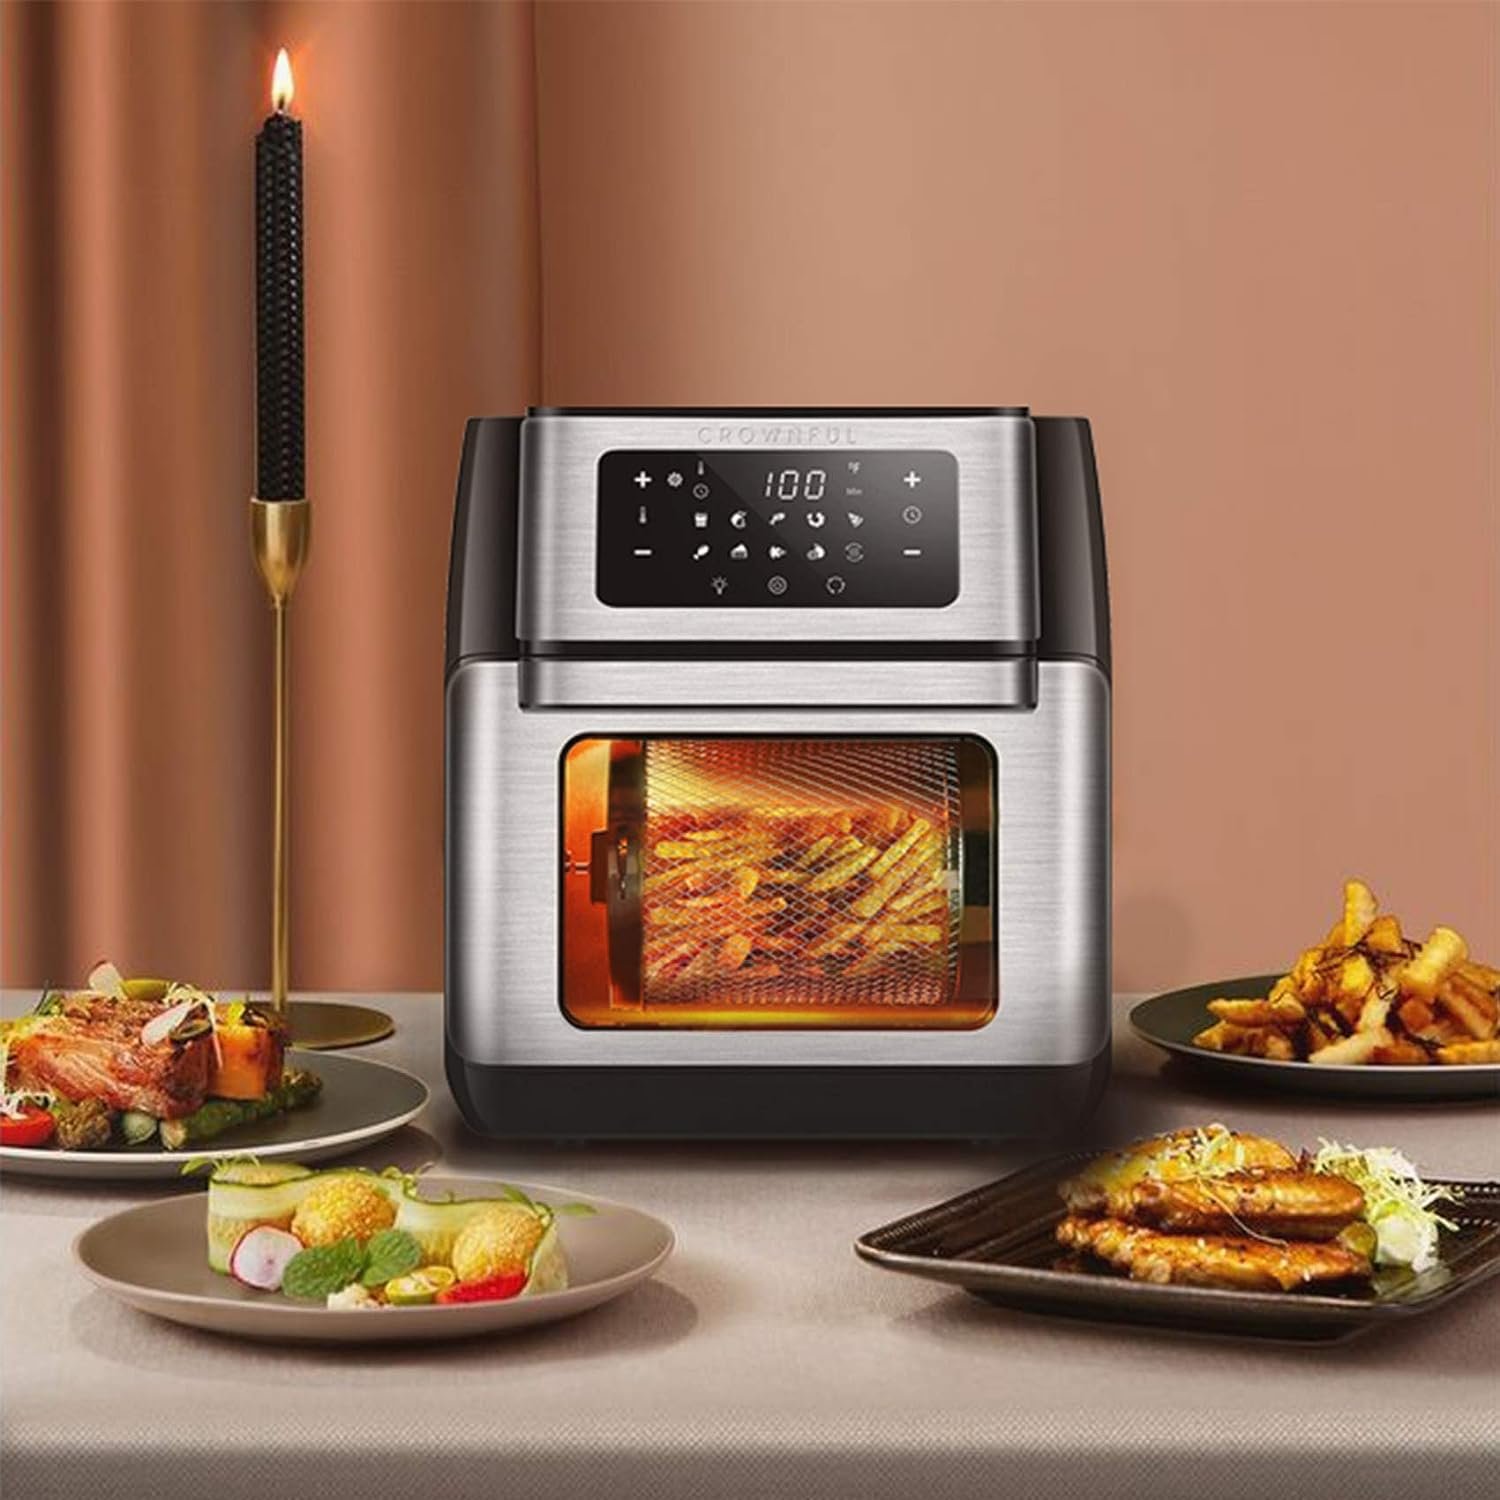 CROWNFUL Air Fryer, 10.6 Quart Large Convection Toaster Oven with Digital LCD Touch Screen, 10 in 1 Oilless Cooker with Rotisserie  Dehydrator, Accessories and Online Cookbook Included